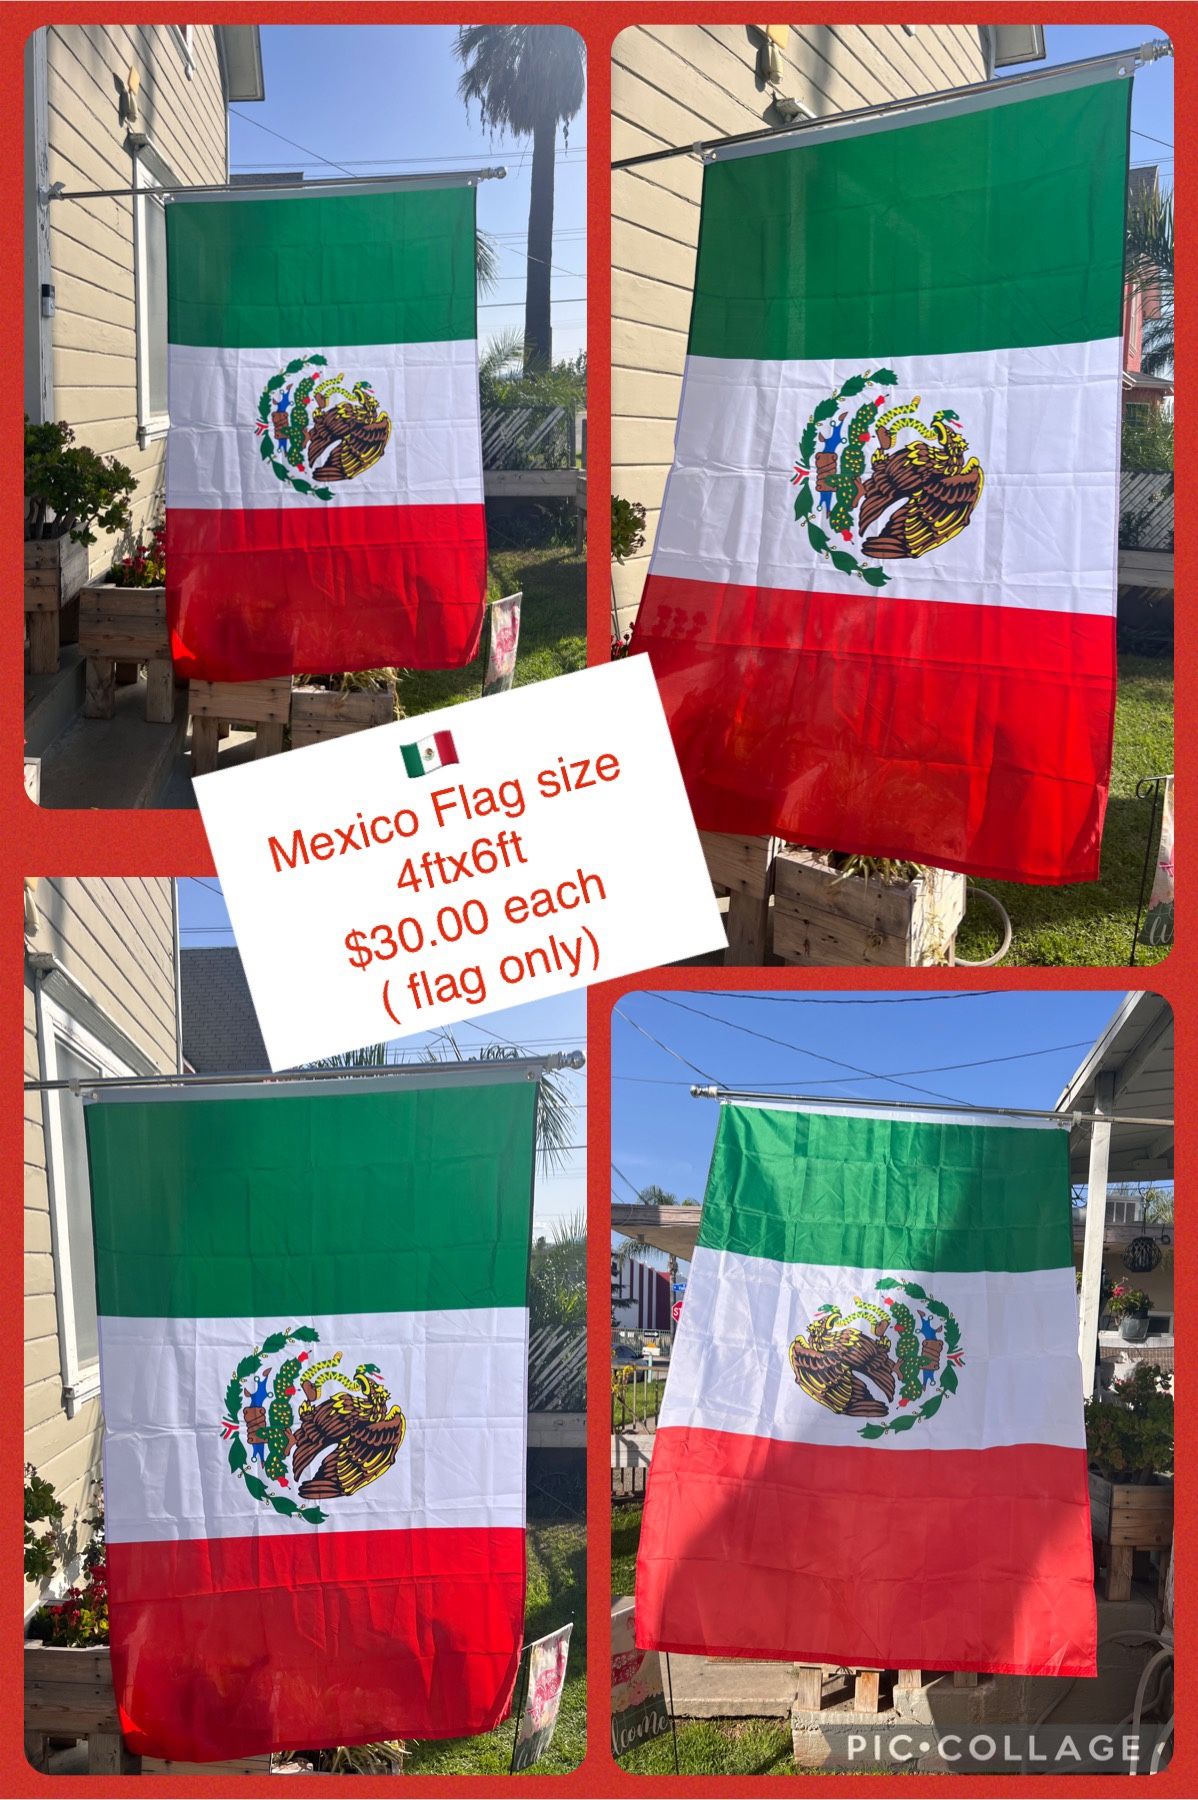 Mexico Flag Size 4ftx6ft 